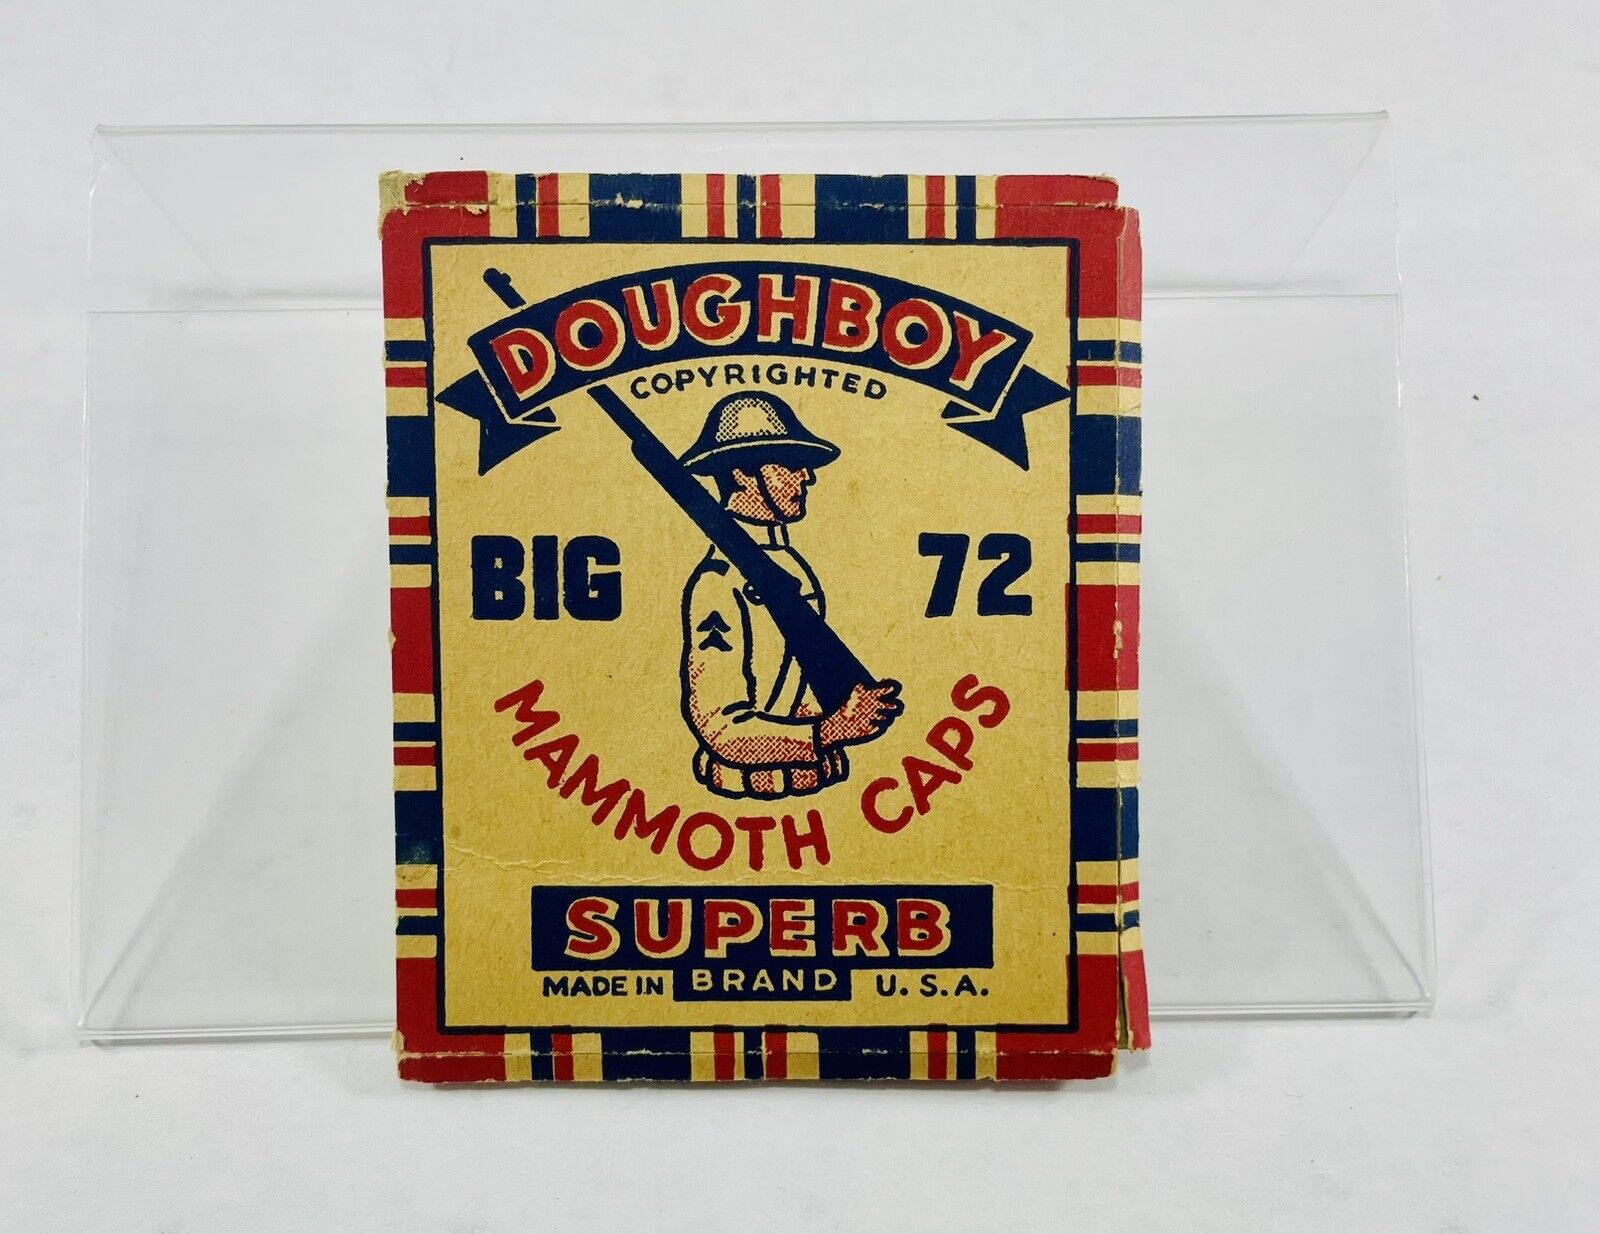 Doughboy Mammoth Superb Caps Big 72 WWI Patriotic Advertising Soldier JRR13